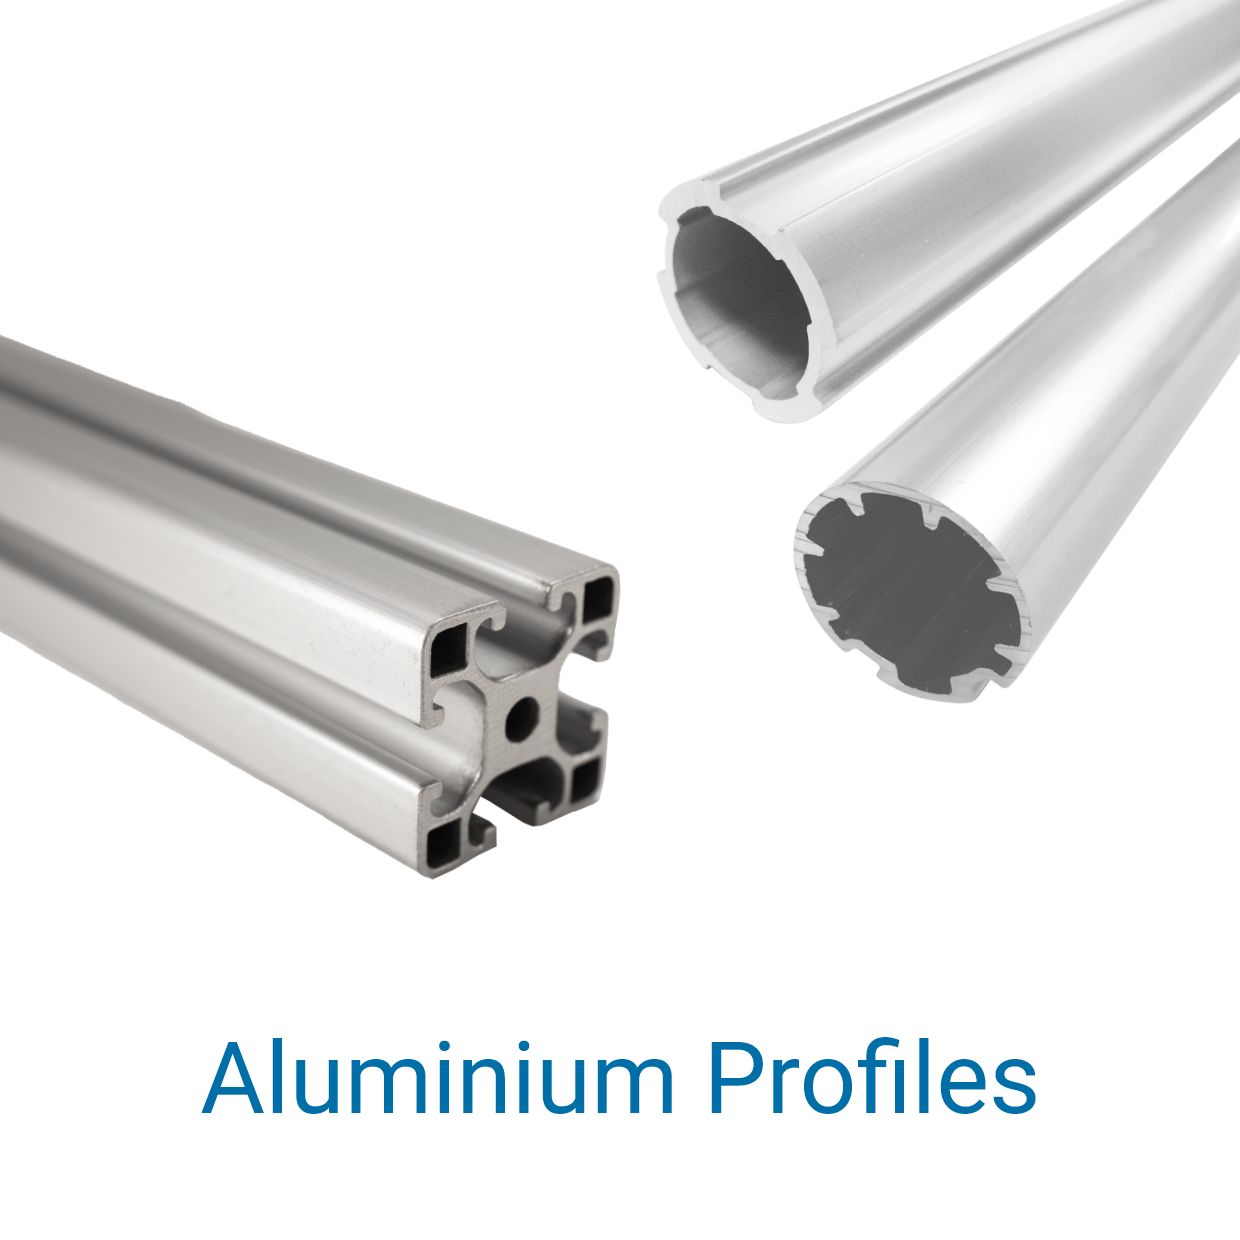 Aluminum profiles from G.S. ACE (BeeWaTec)